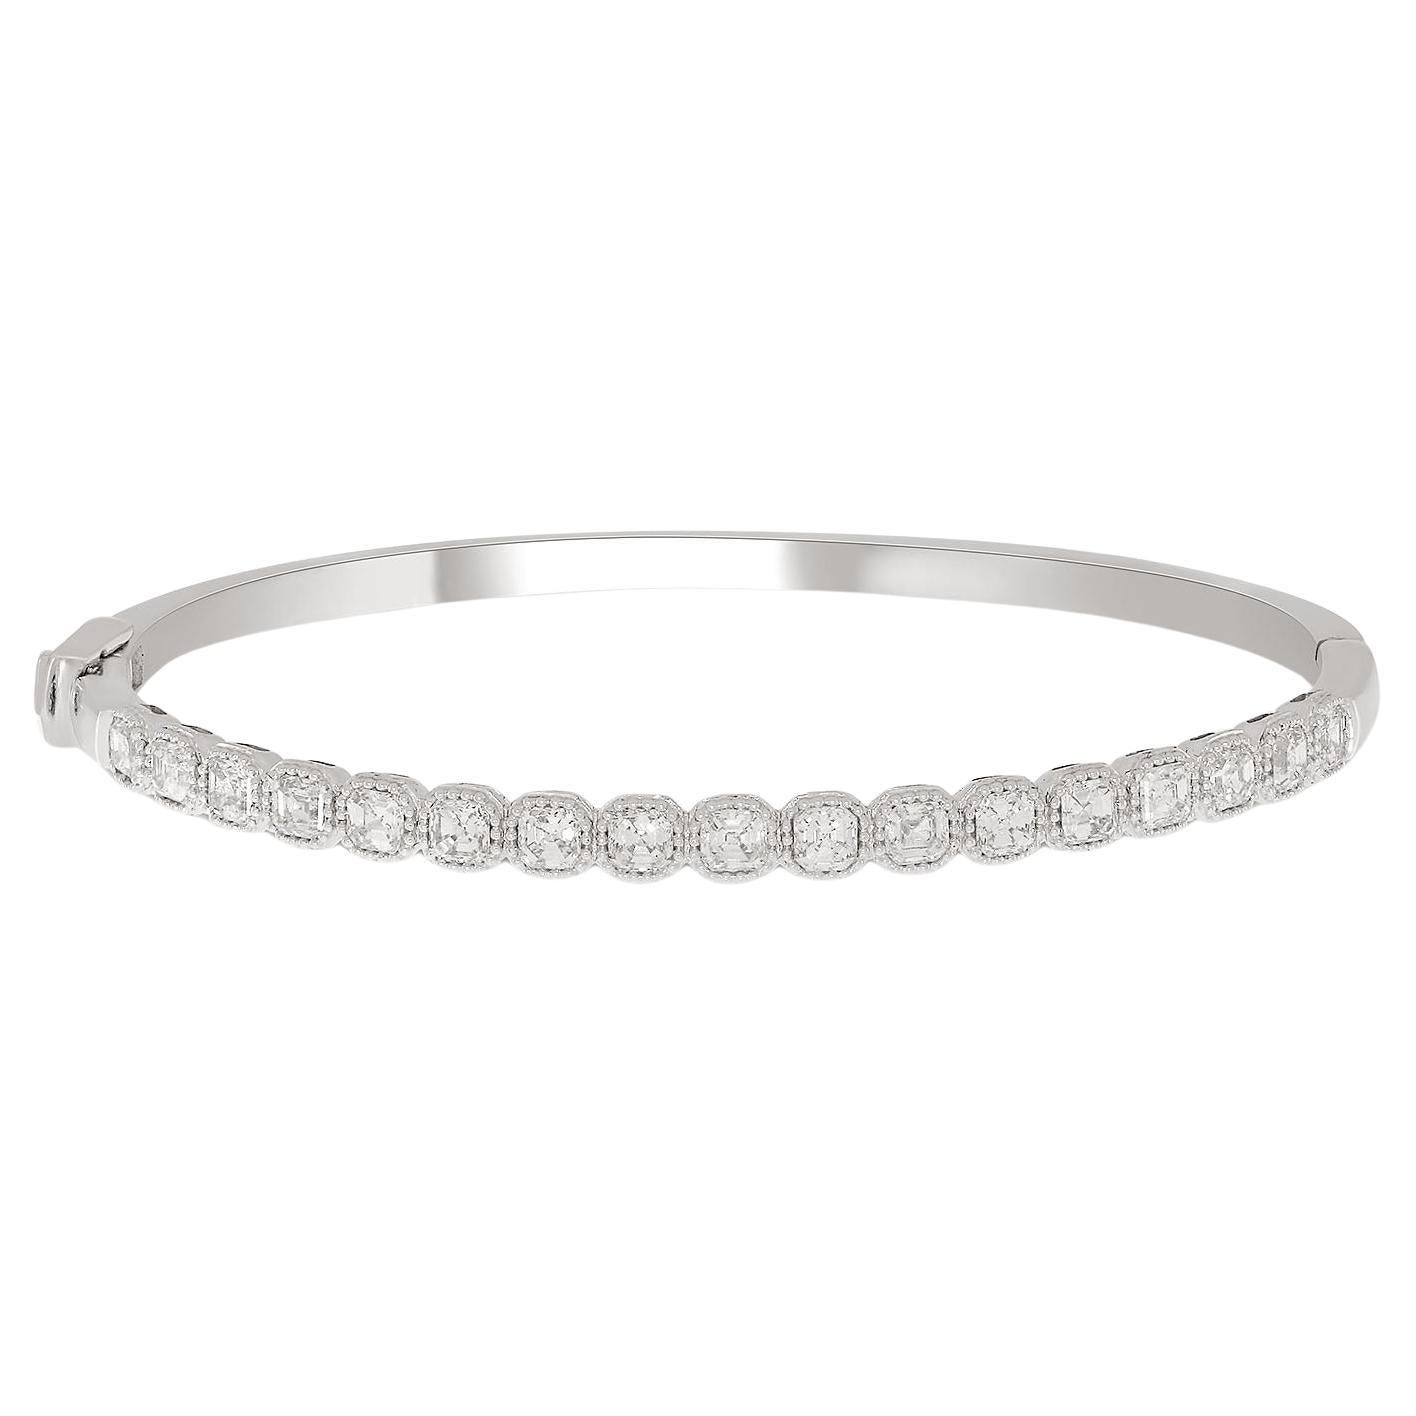 Cushion Shaped Tennis Bangle made In 14k White Gold